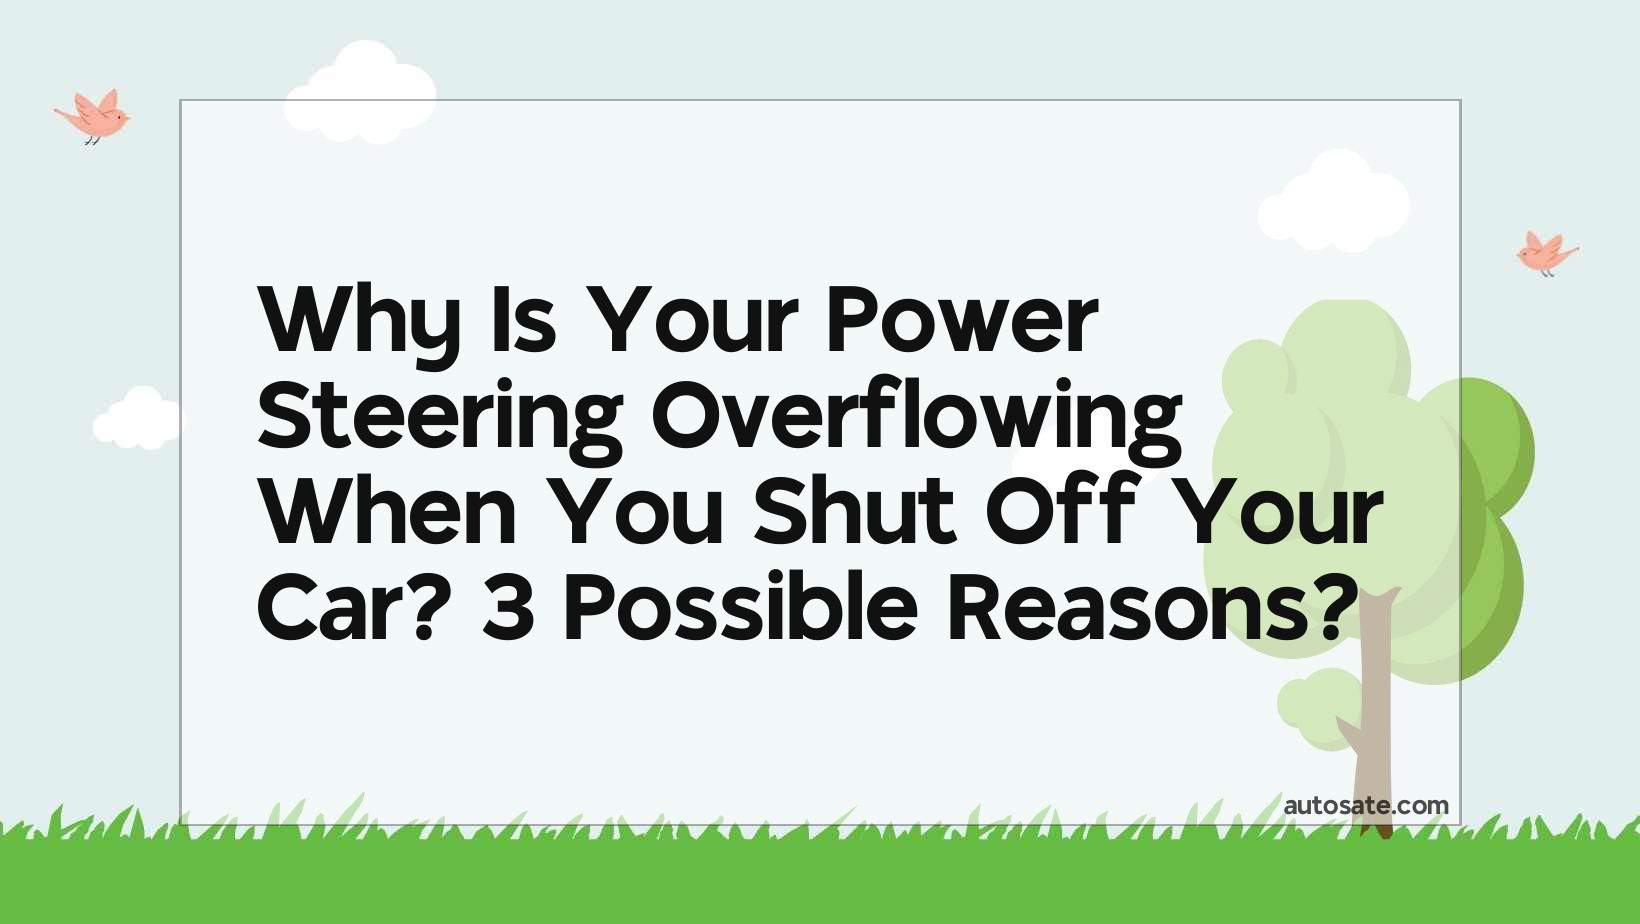 Why Is Your Power Steering Overflowing When You Shut Off Your Car? 3 Possible Reasons